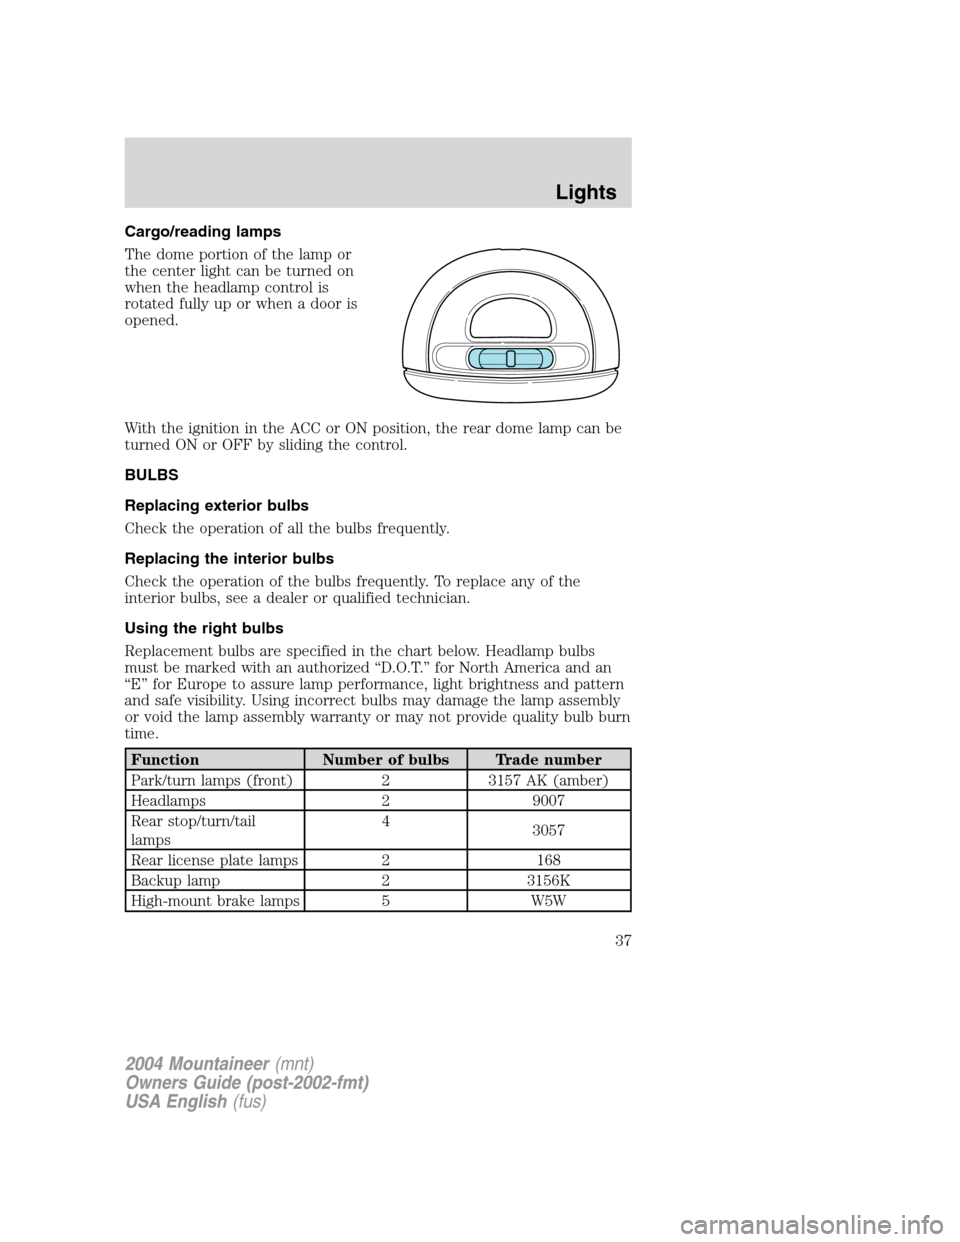 Mercury Mountaineer 2004  s Owners Guide Cargo/reading lamps
The dome portion of the lamp or
the center light can be turned on
when the headlamp control is
rotated fully up or when a door is
opened.
With the ignition in the ACC or ON positio